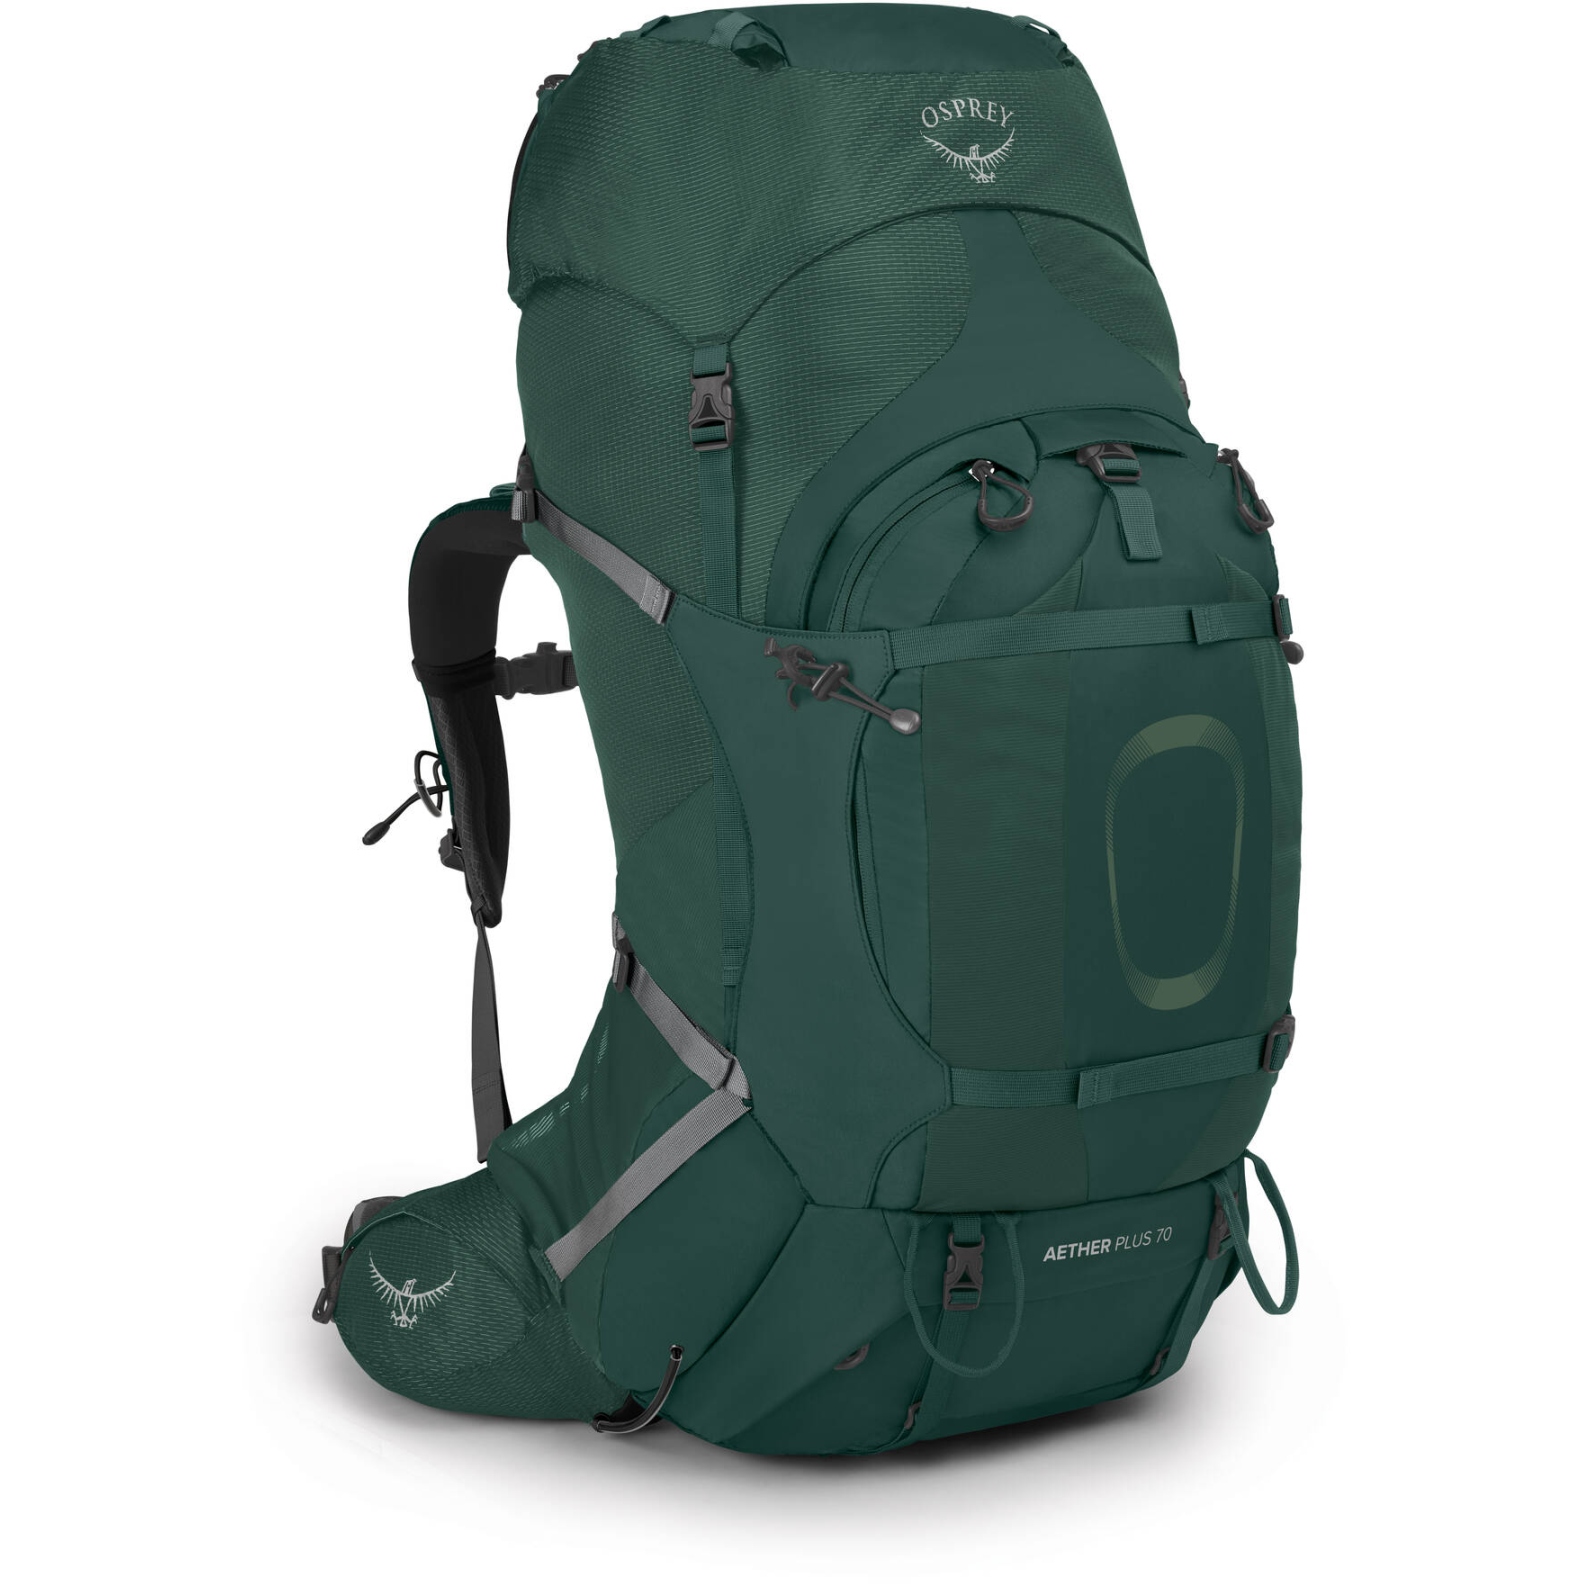 Picture of Osprey Aether Plus 70 Backpack - Axo Green - S/M